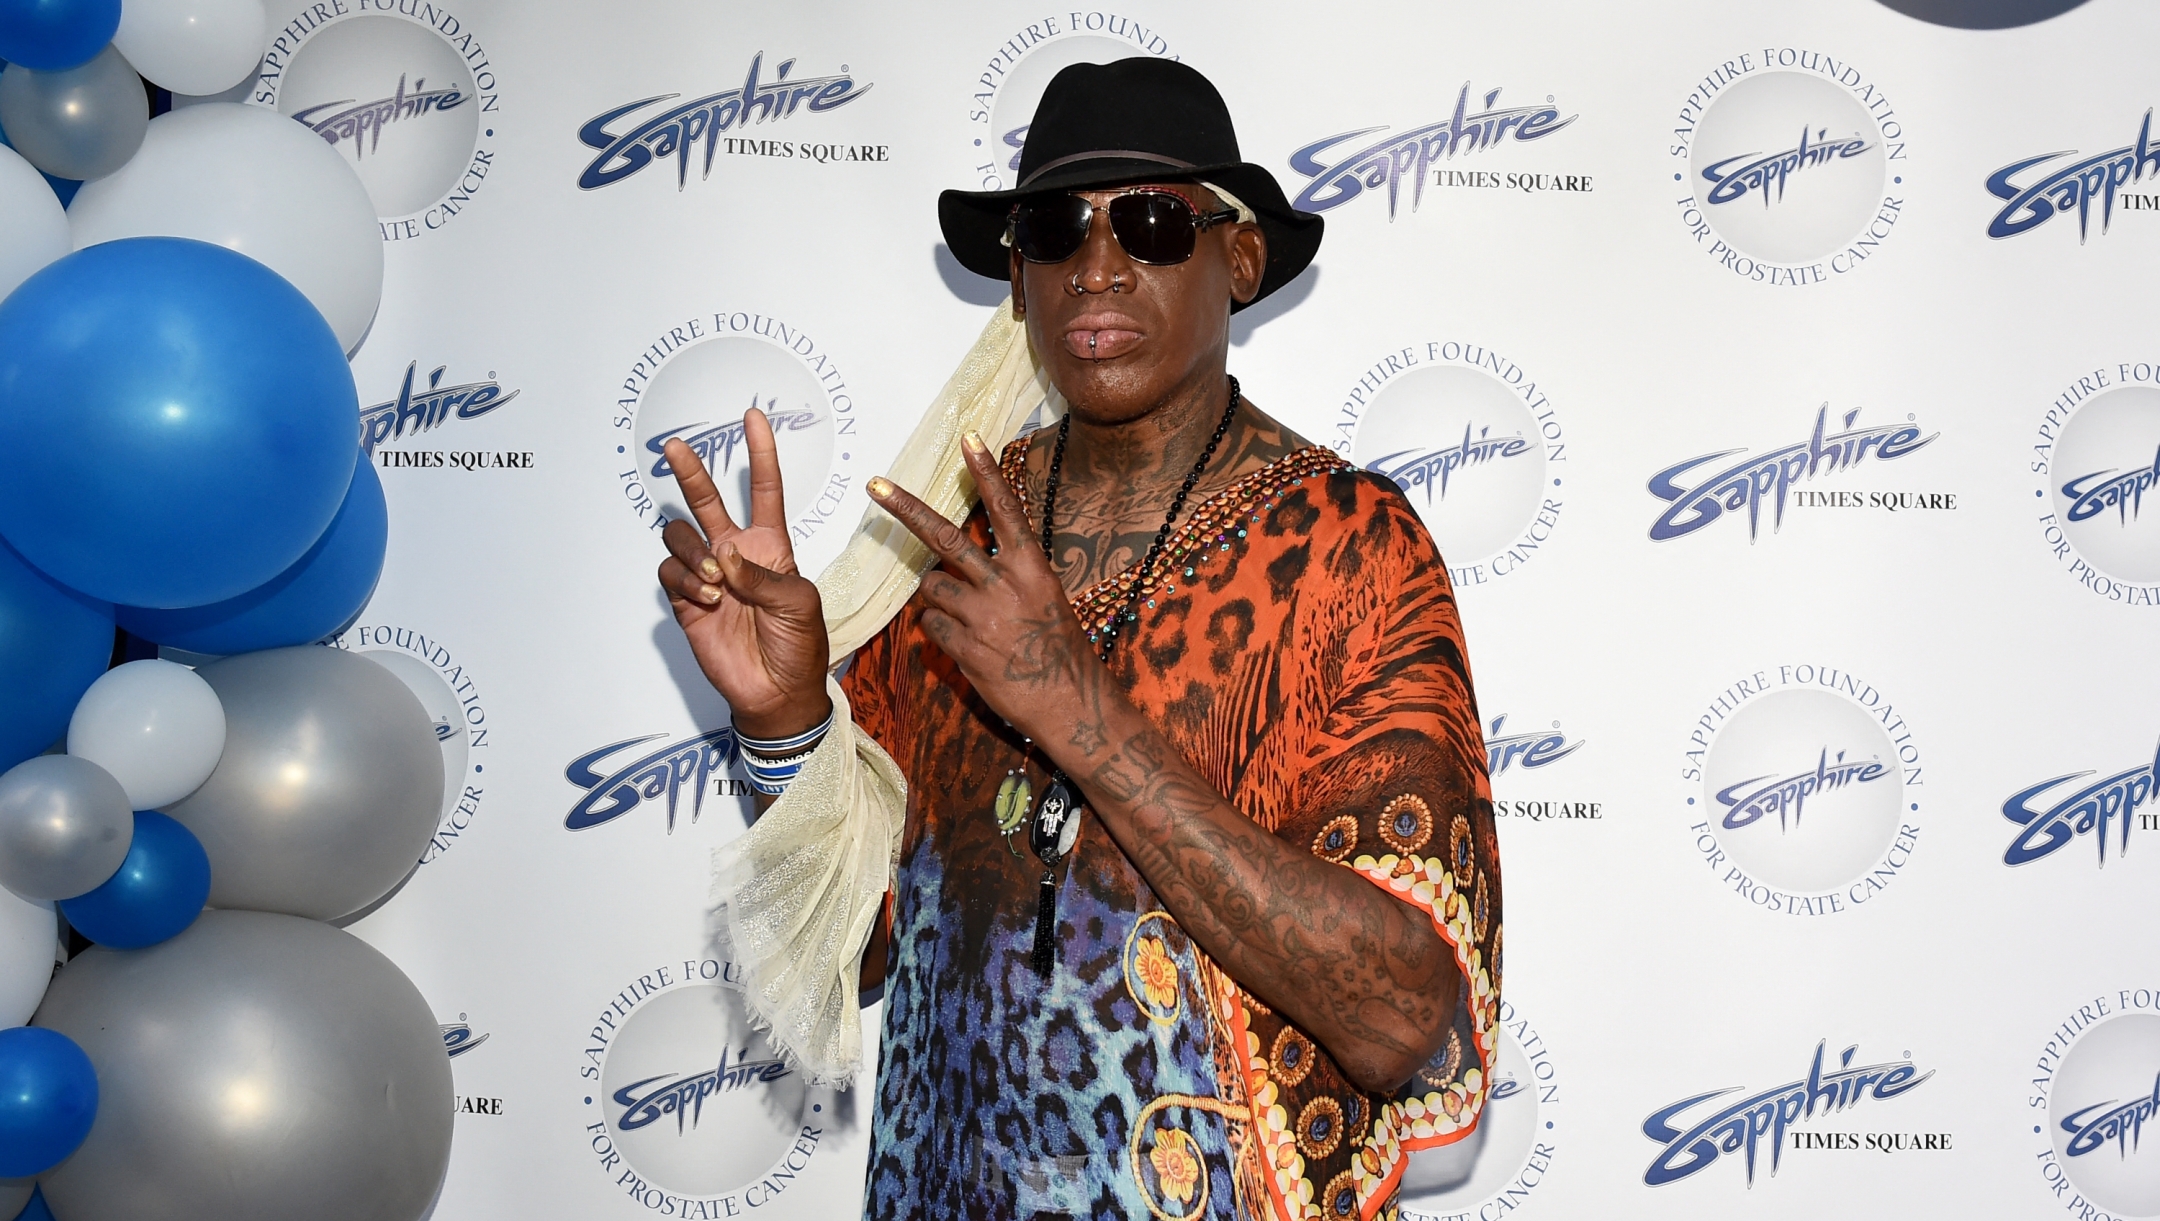 NEW YORK, NEW YORK - AUGUST 15: Dennis Rodman attends Sapphire Gentlemen's Club Debuts New Times Square Location on August 15, 2019 in New York City.   Ilya S. Savenok/Getty Images for Sapphire Gentlemen's Club/AFP (Photo by Ilya S. Savenok / GETTY IMAGES NORTH AMERICA / Getty Images via AFP)